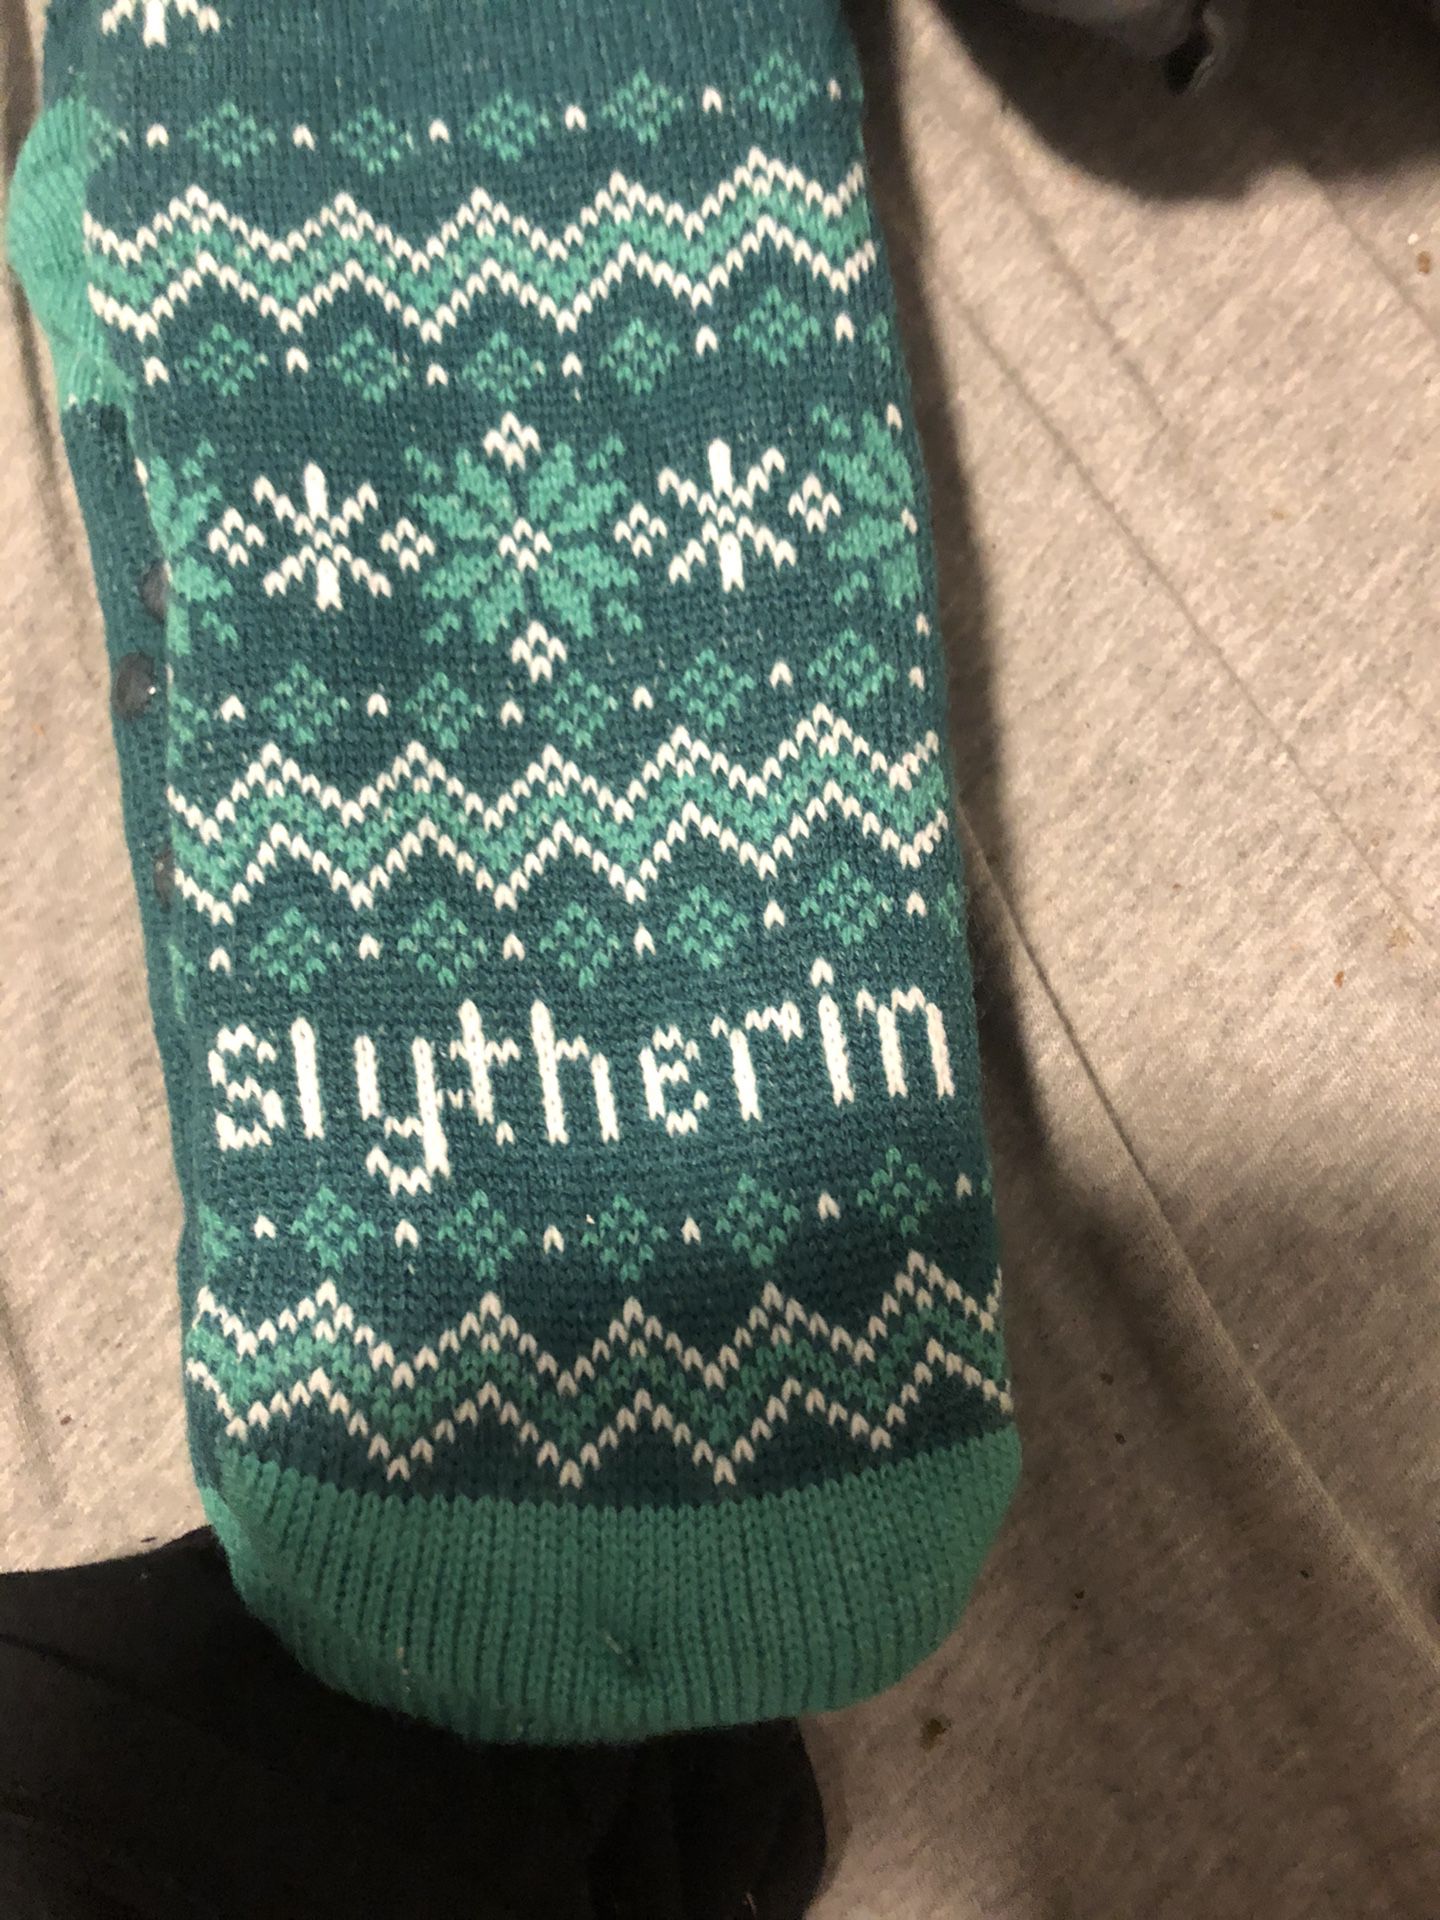 Slytherin Harry Potter socks one size fits all brand with tags still!